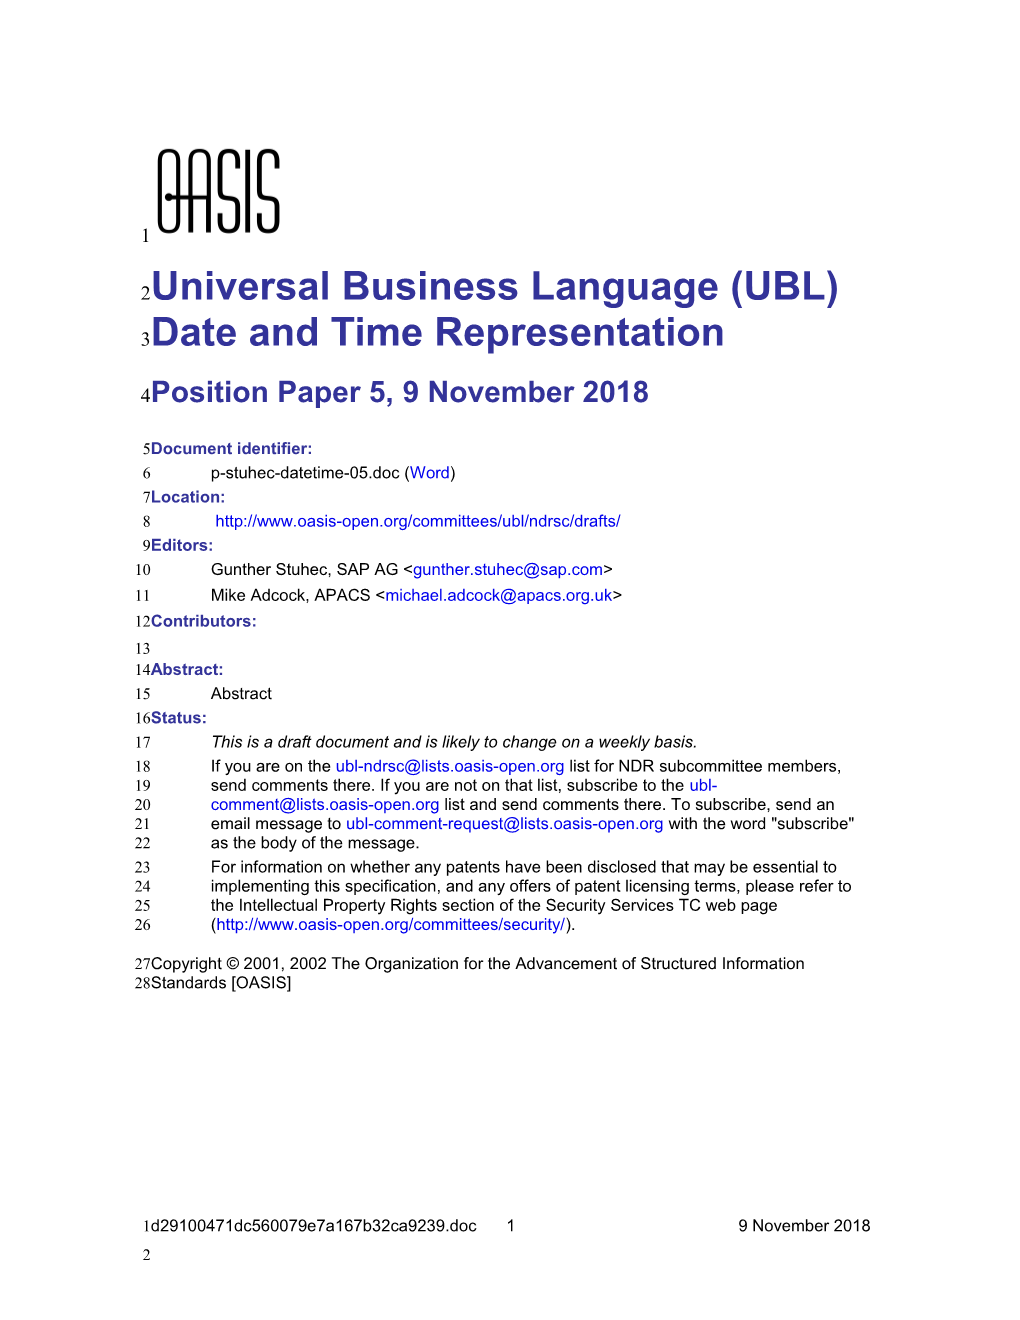 Universal Business Language (UBL) Date and Time Representation